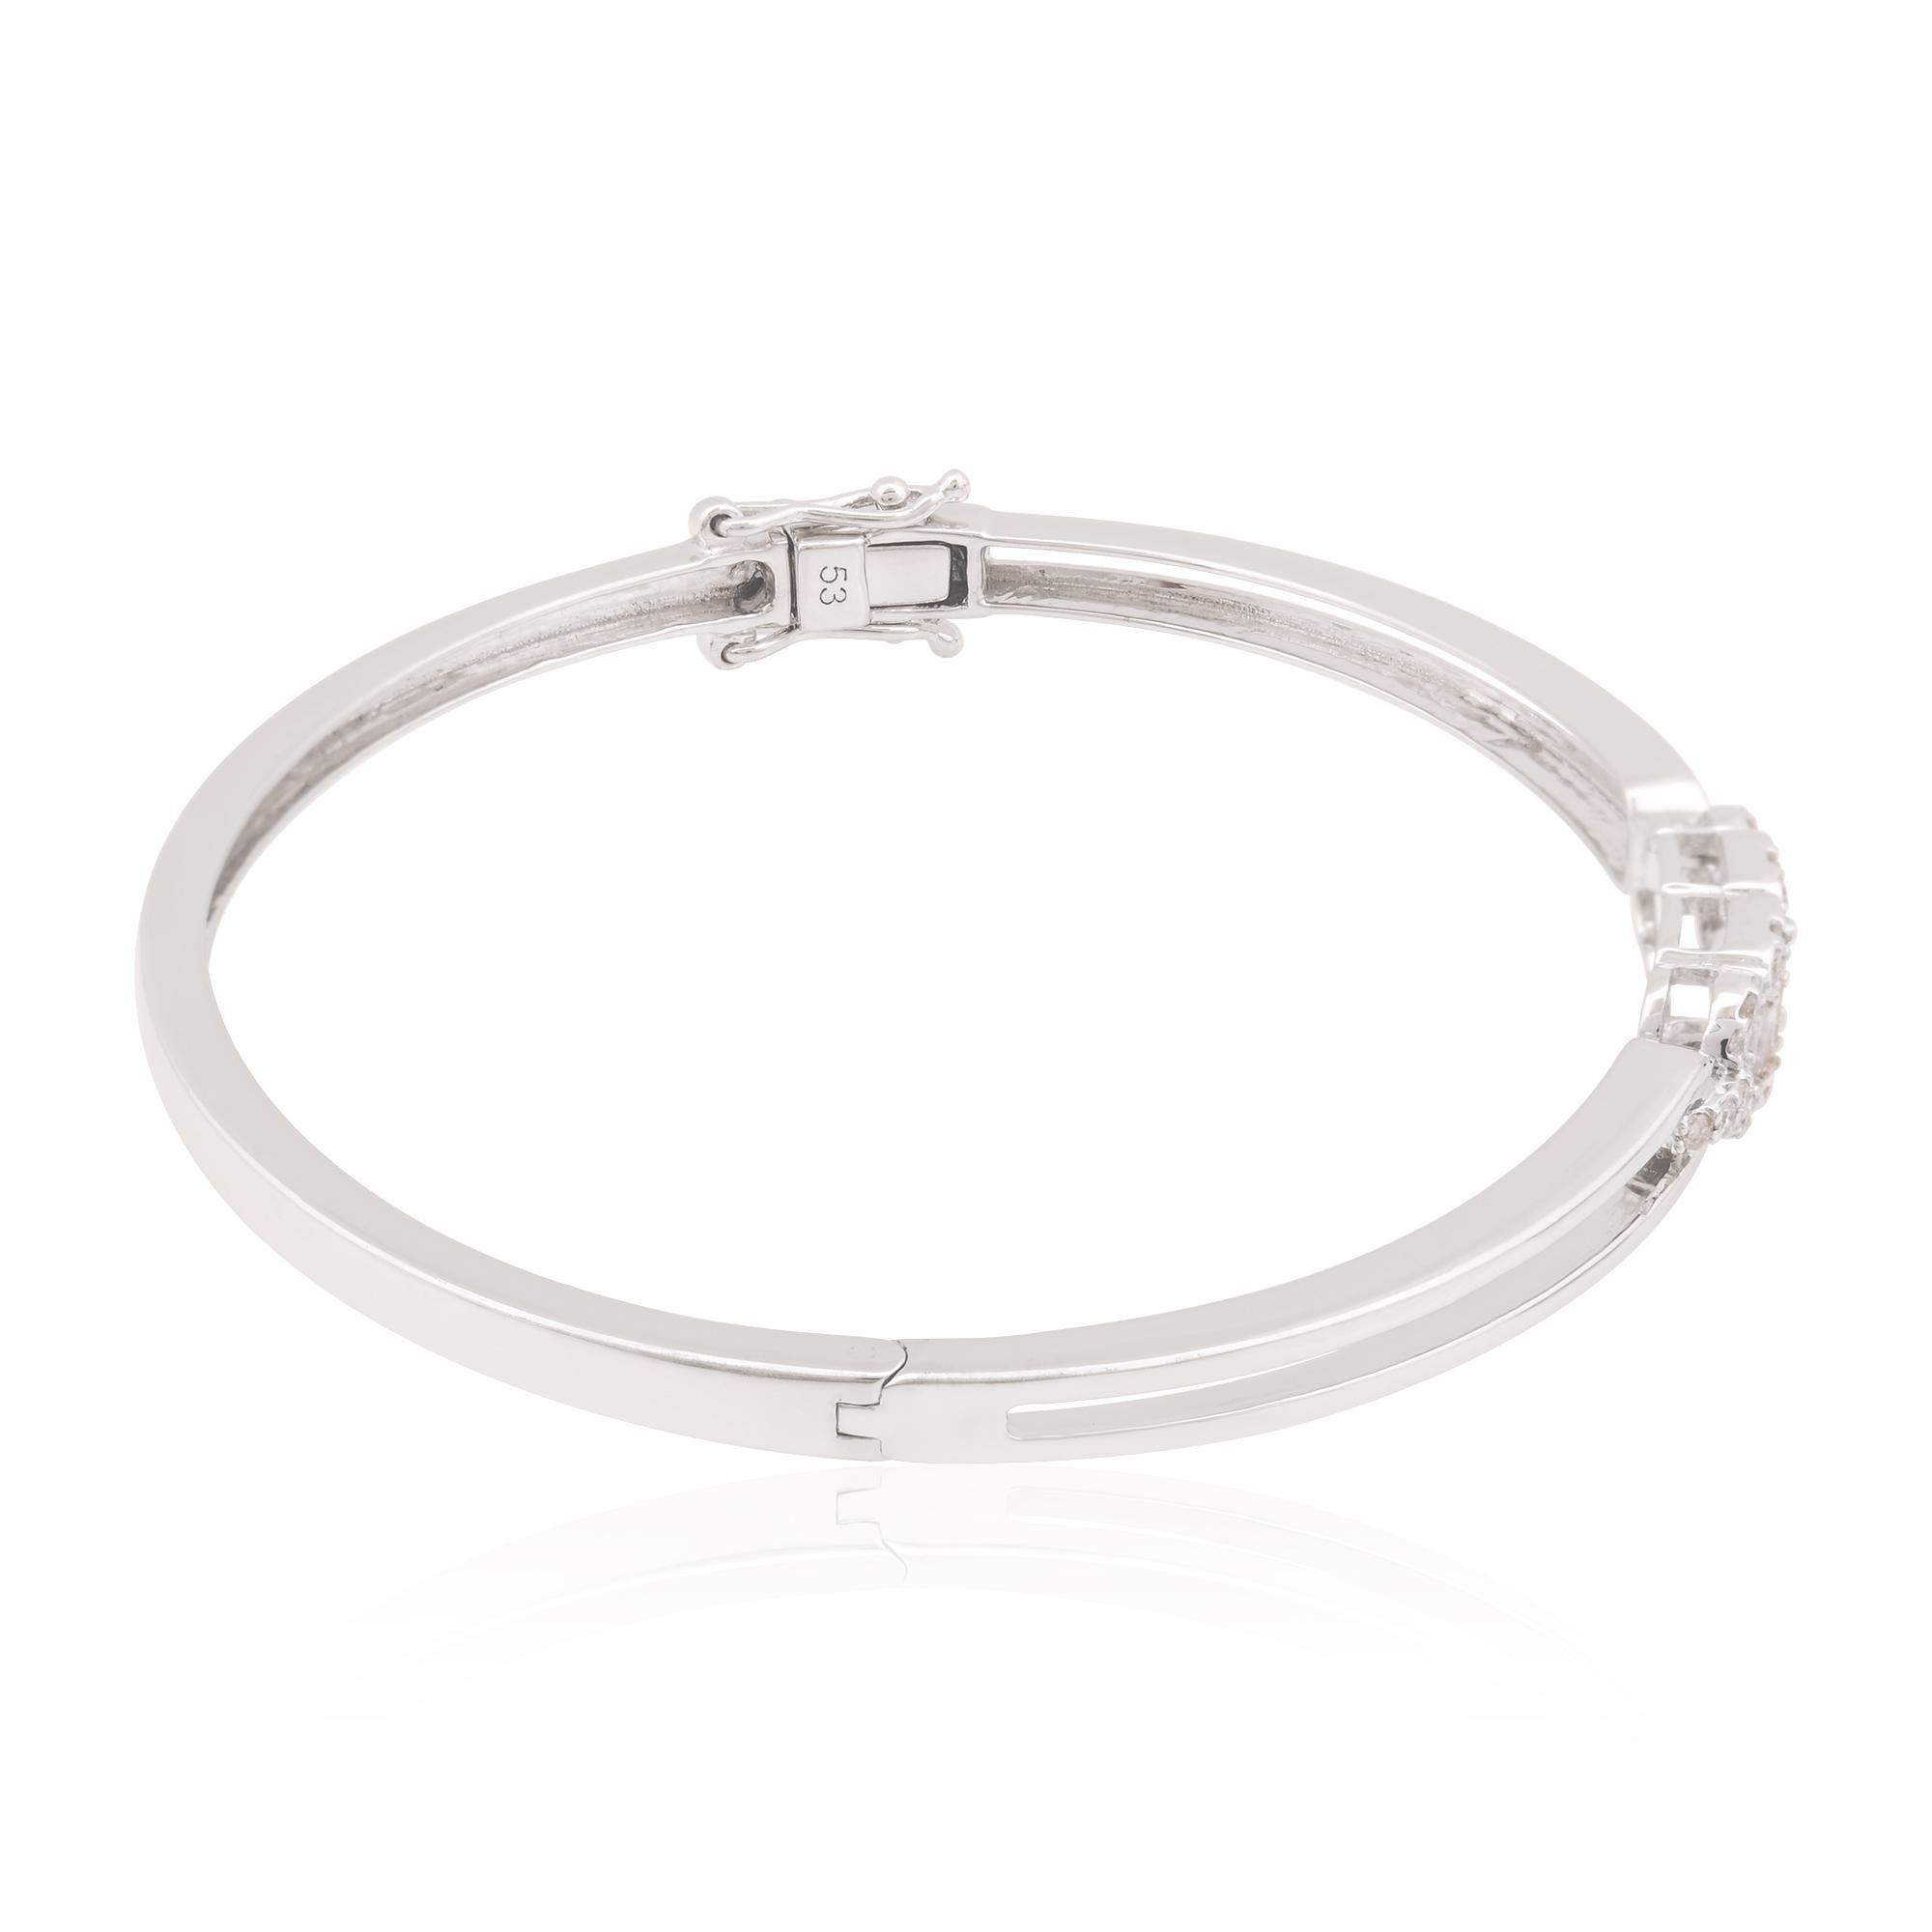 This baguette diamond bracelet is the perfect accessory for both formal and casual occasions. It effortlessly elevates any outfit, adding a touch of sparkle and refinement. It is a symbol of elegance and luxury, a piece that will be treasured for